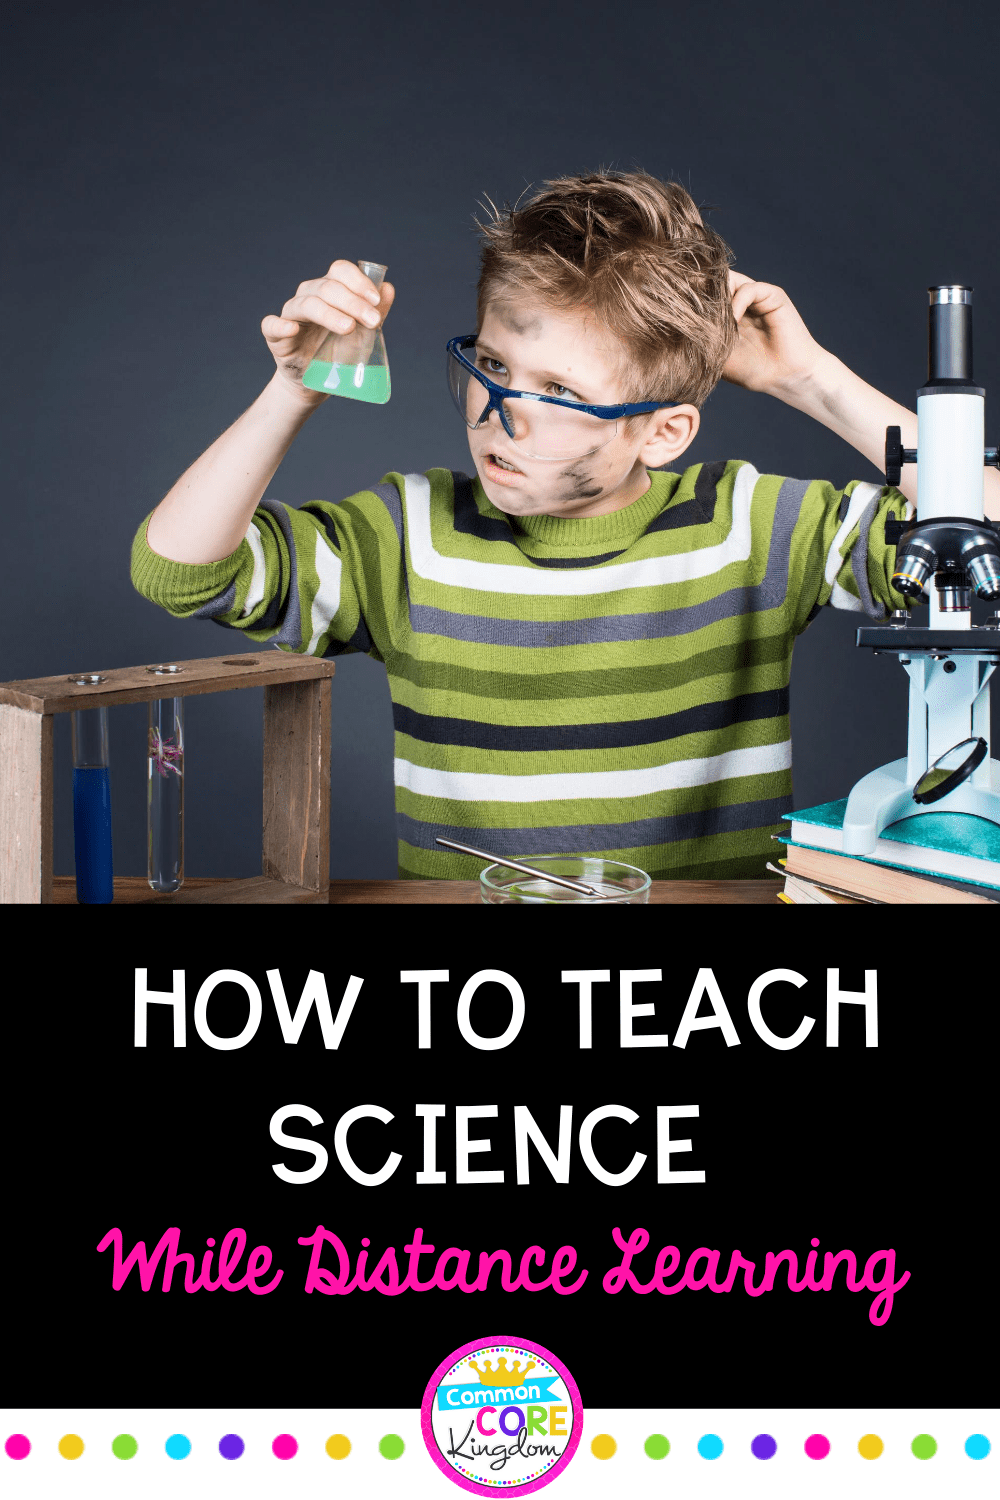 How to Teach Science while Distance Learning pin